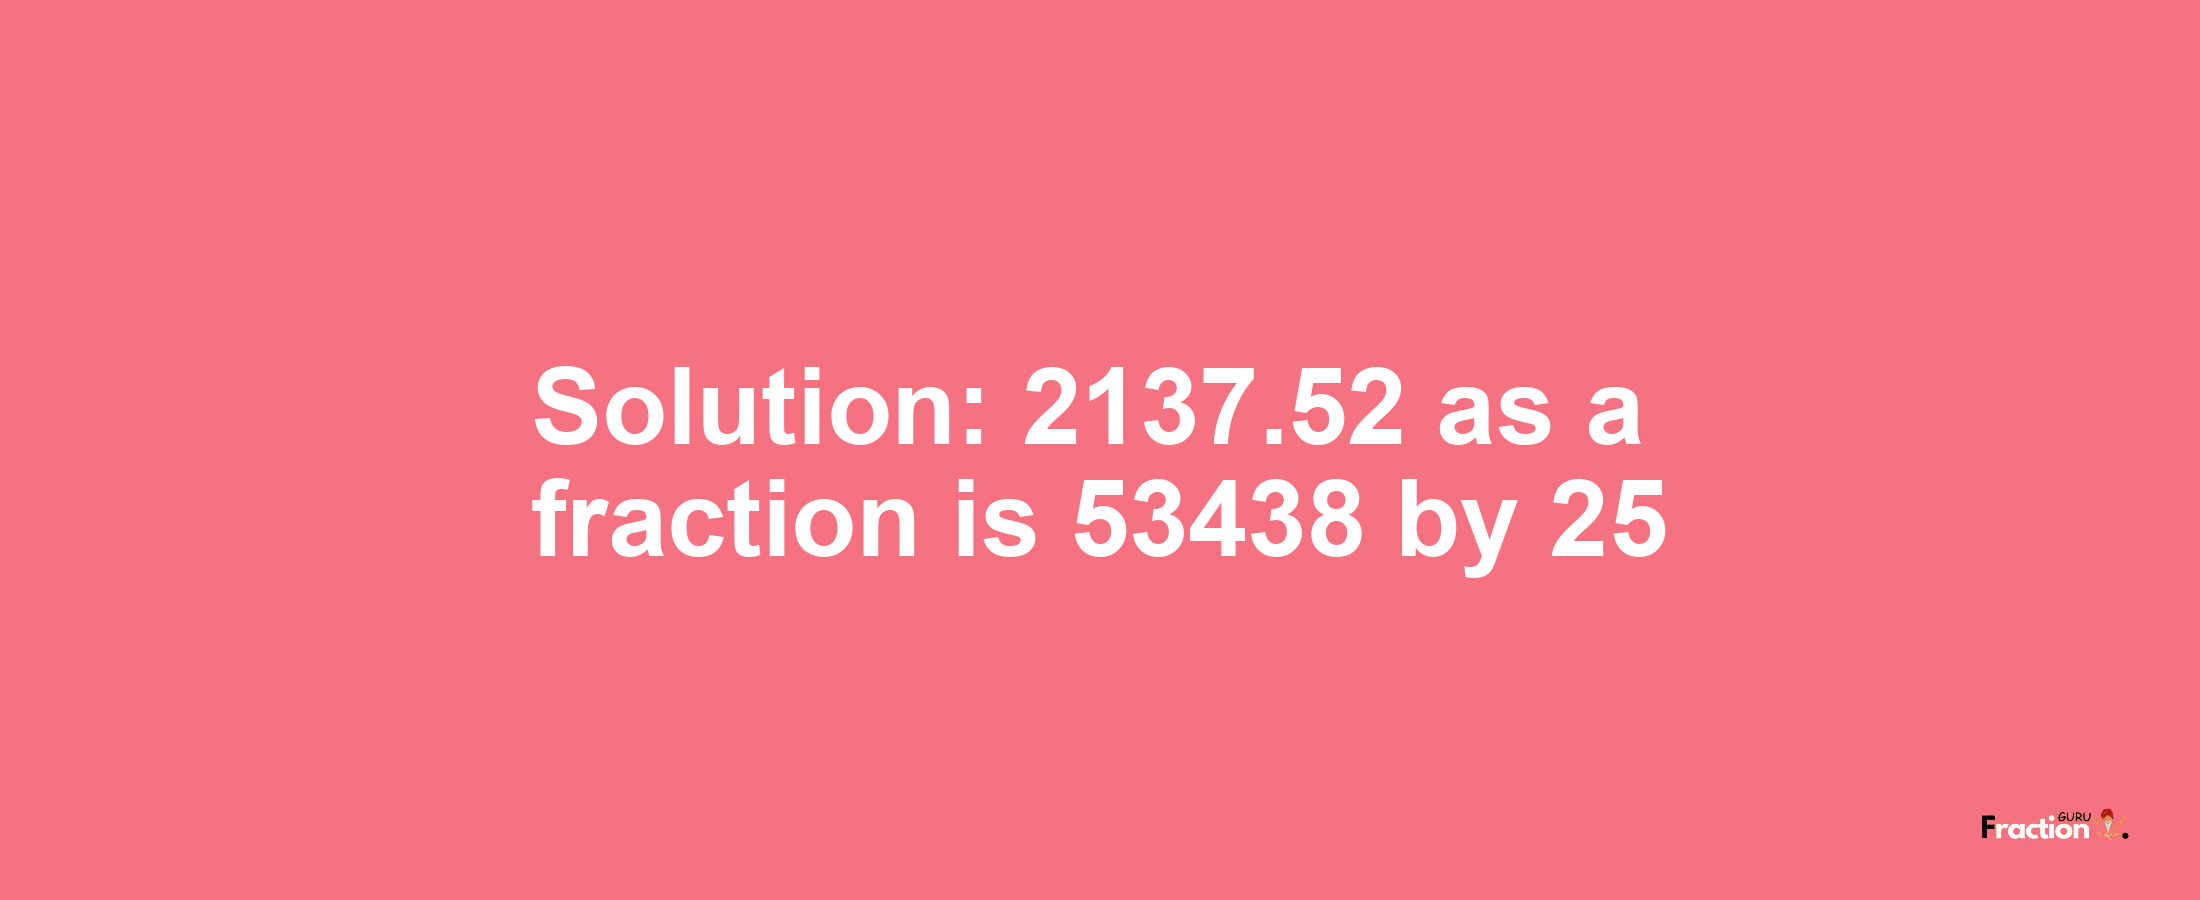 Solution:2137.52 as a fraction is 53438/25